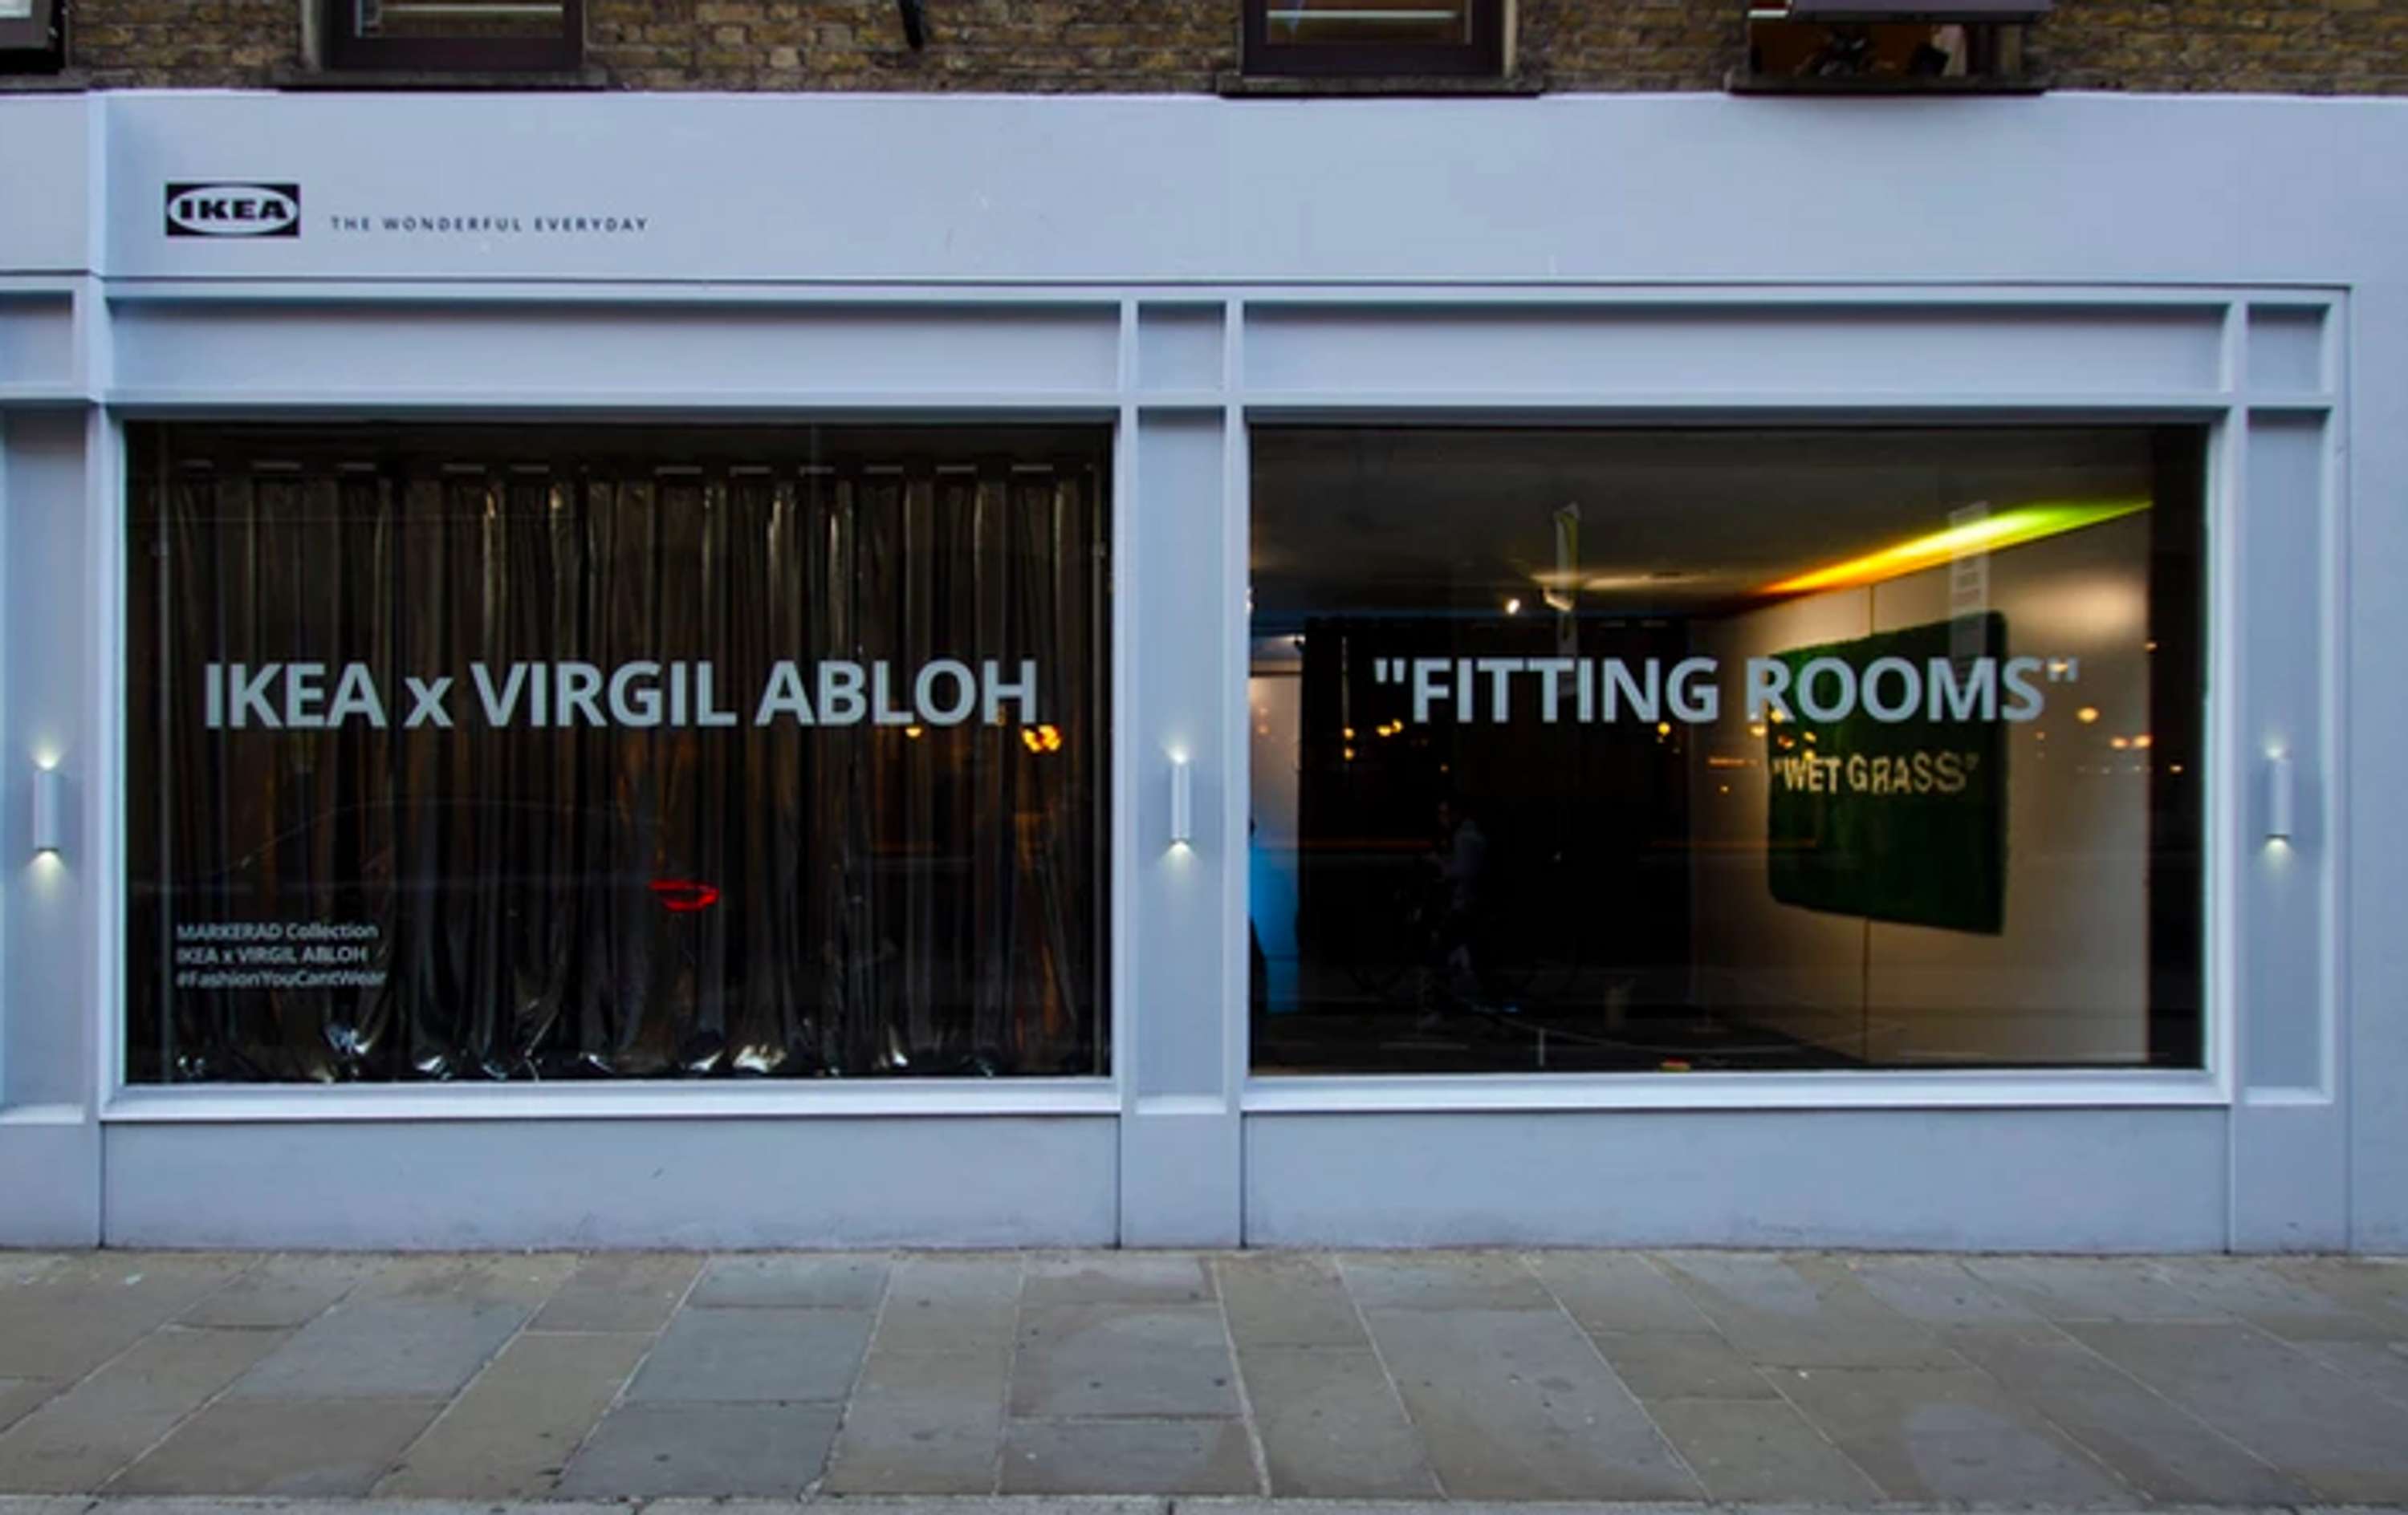 Ikea x Virgil Abloh: Fitting Rooms